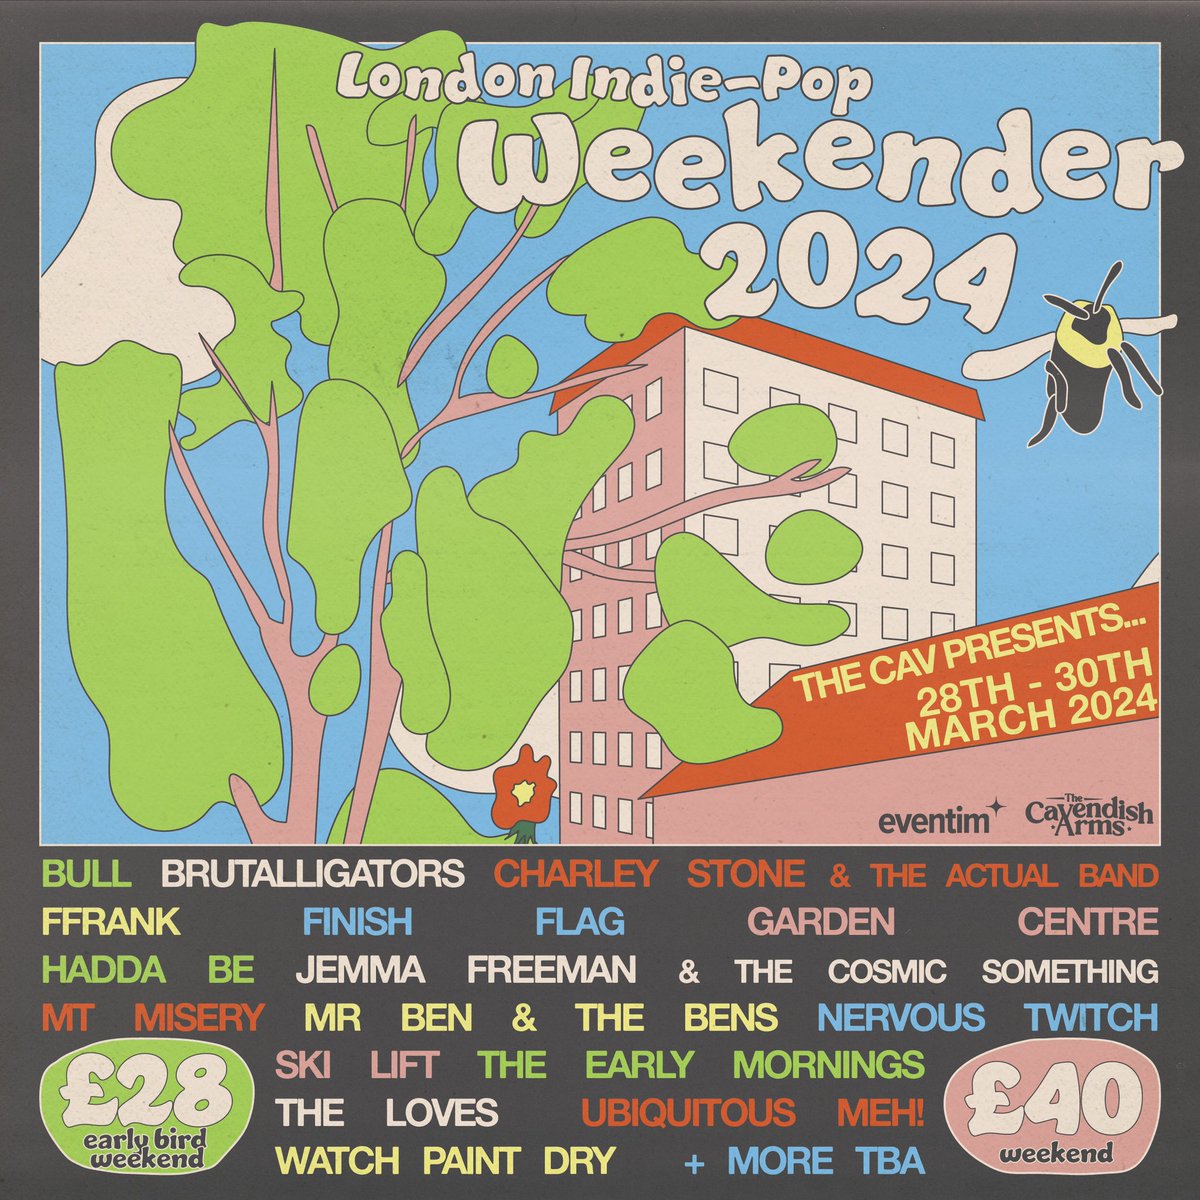 I have put together a ridiculously massive London Indie-Pop Weekender lineup!! Very exciting. Just a handful of early bird tickets remain!